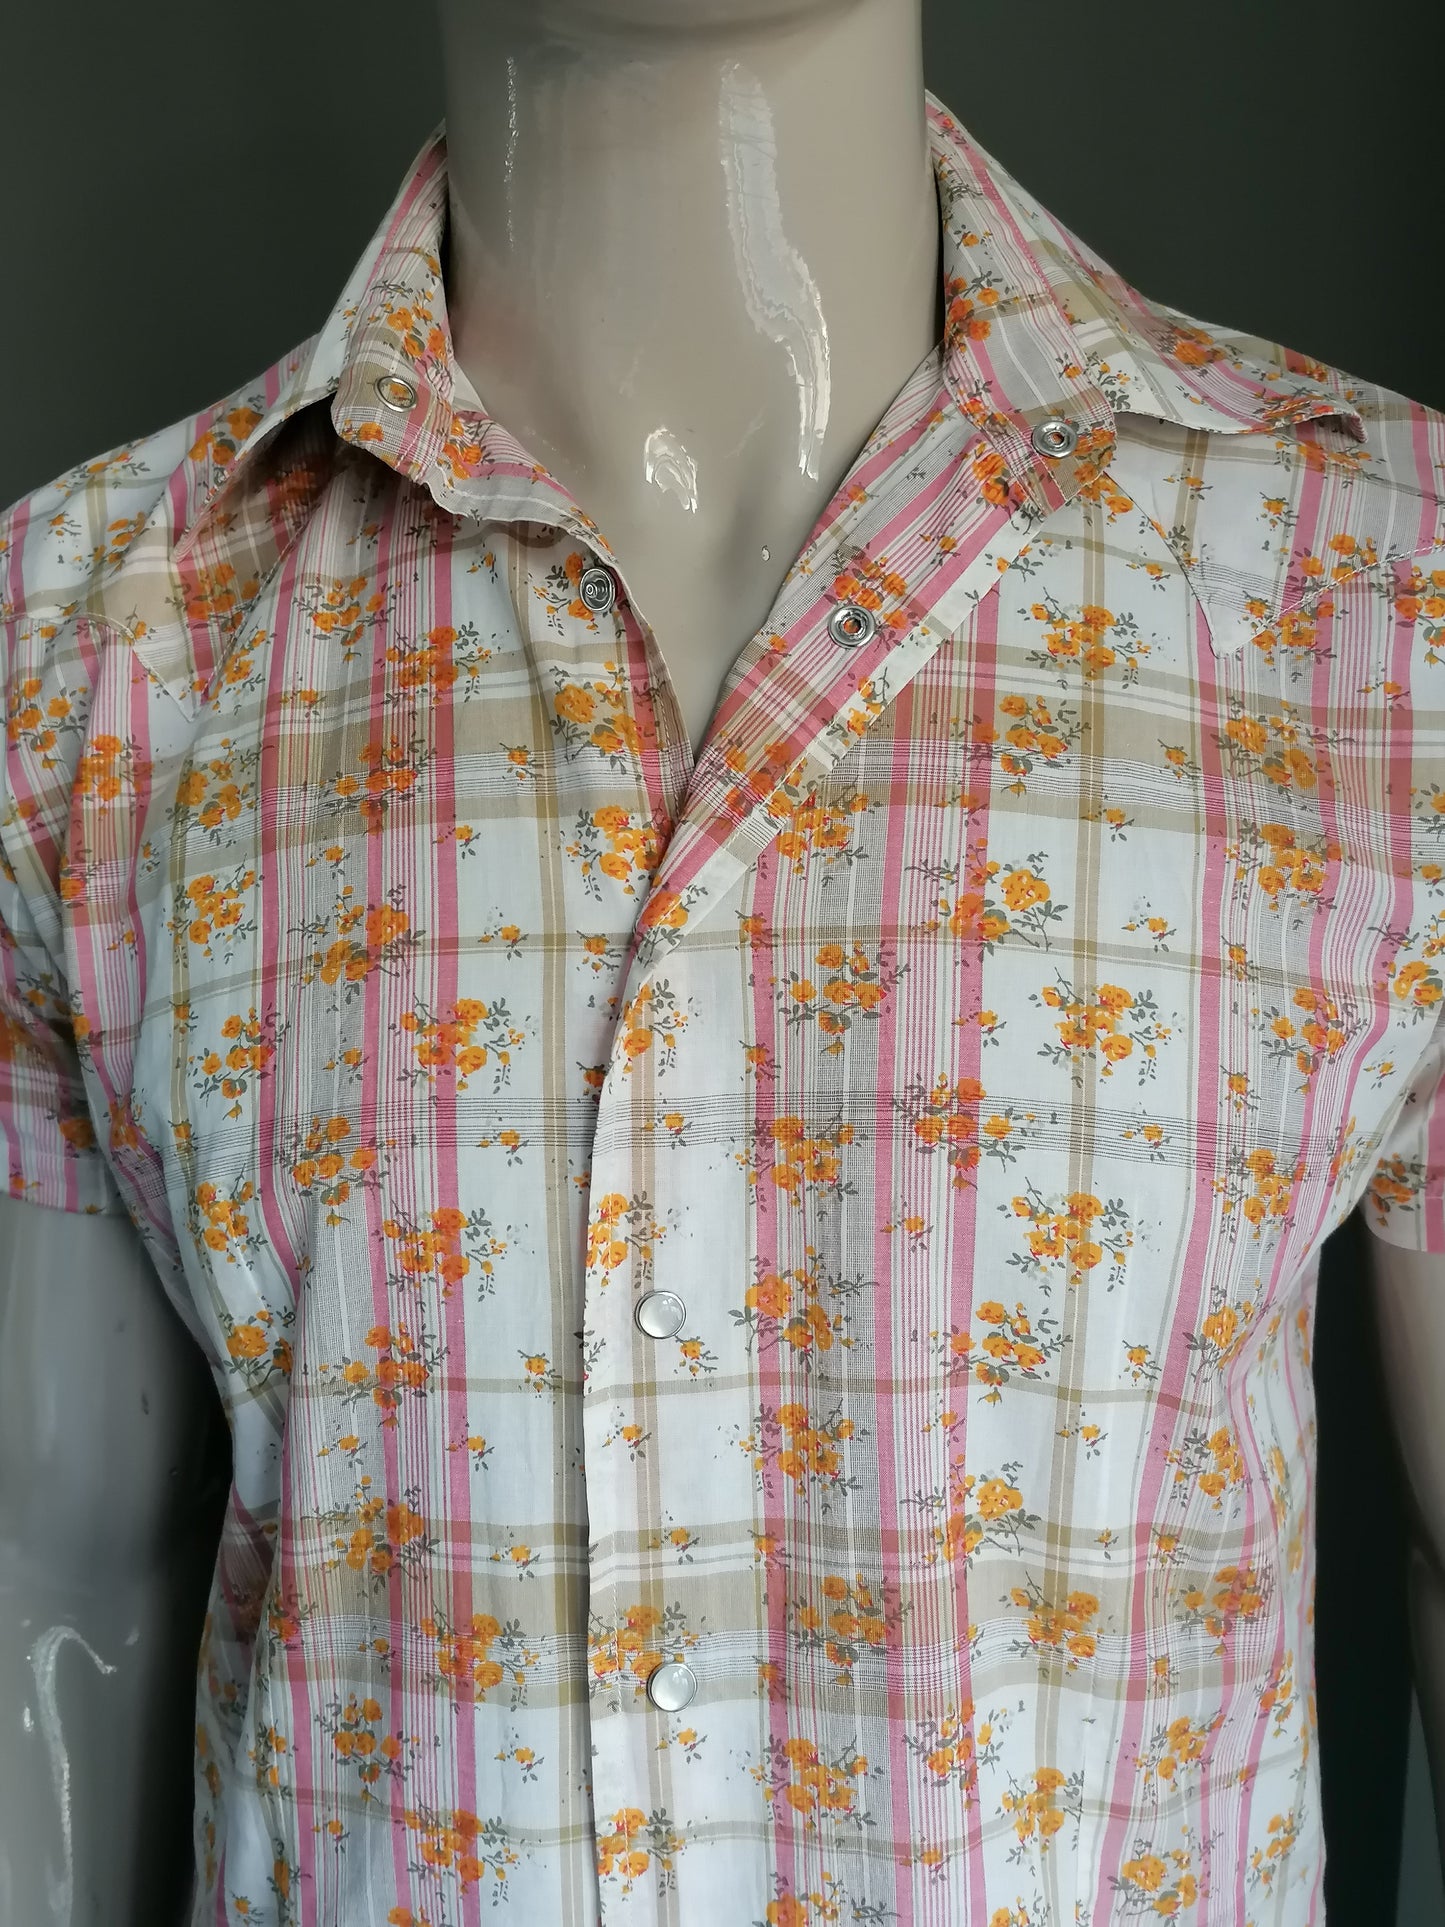 New Edition Shirt short sleeve with press studs. Orange pink beige flowers print. Size M.